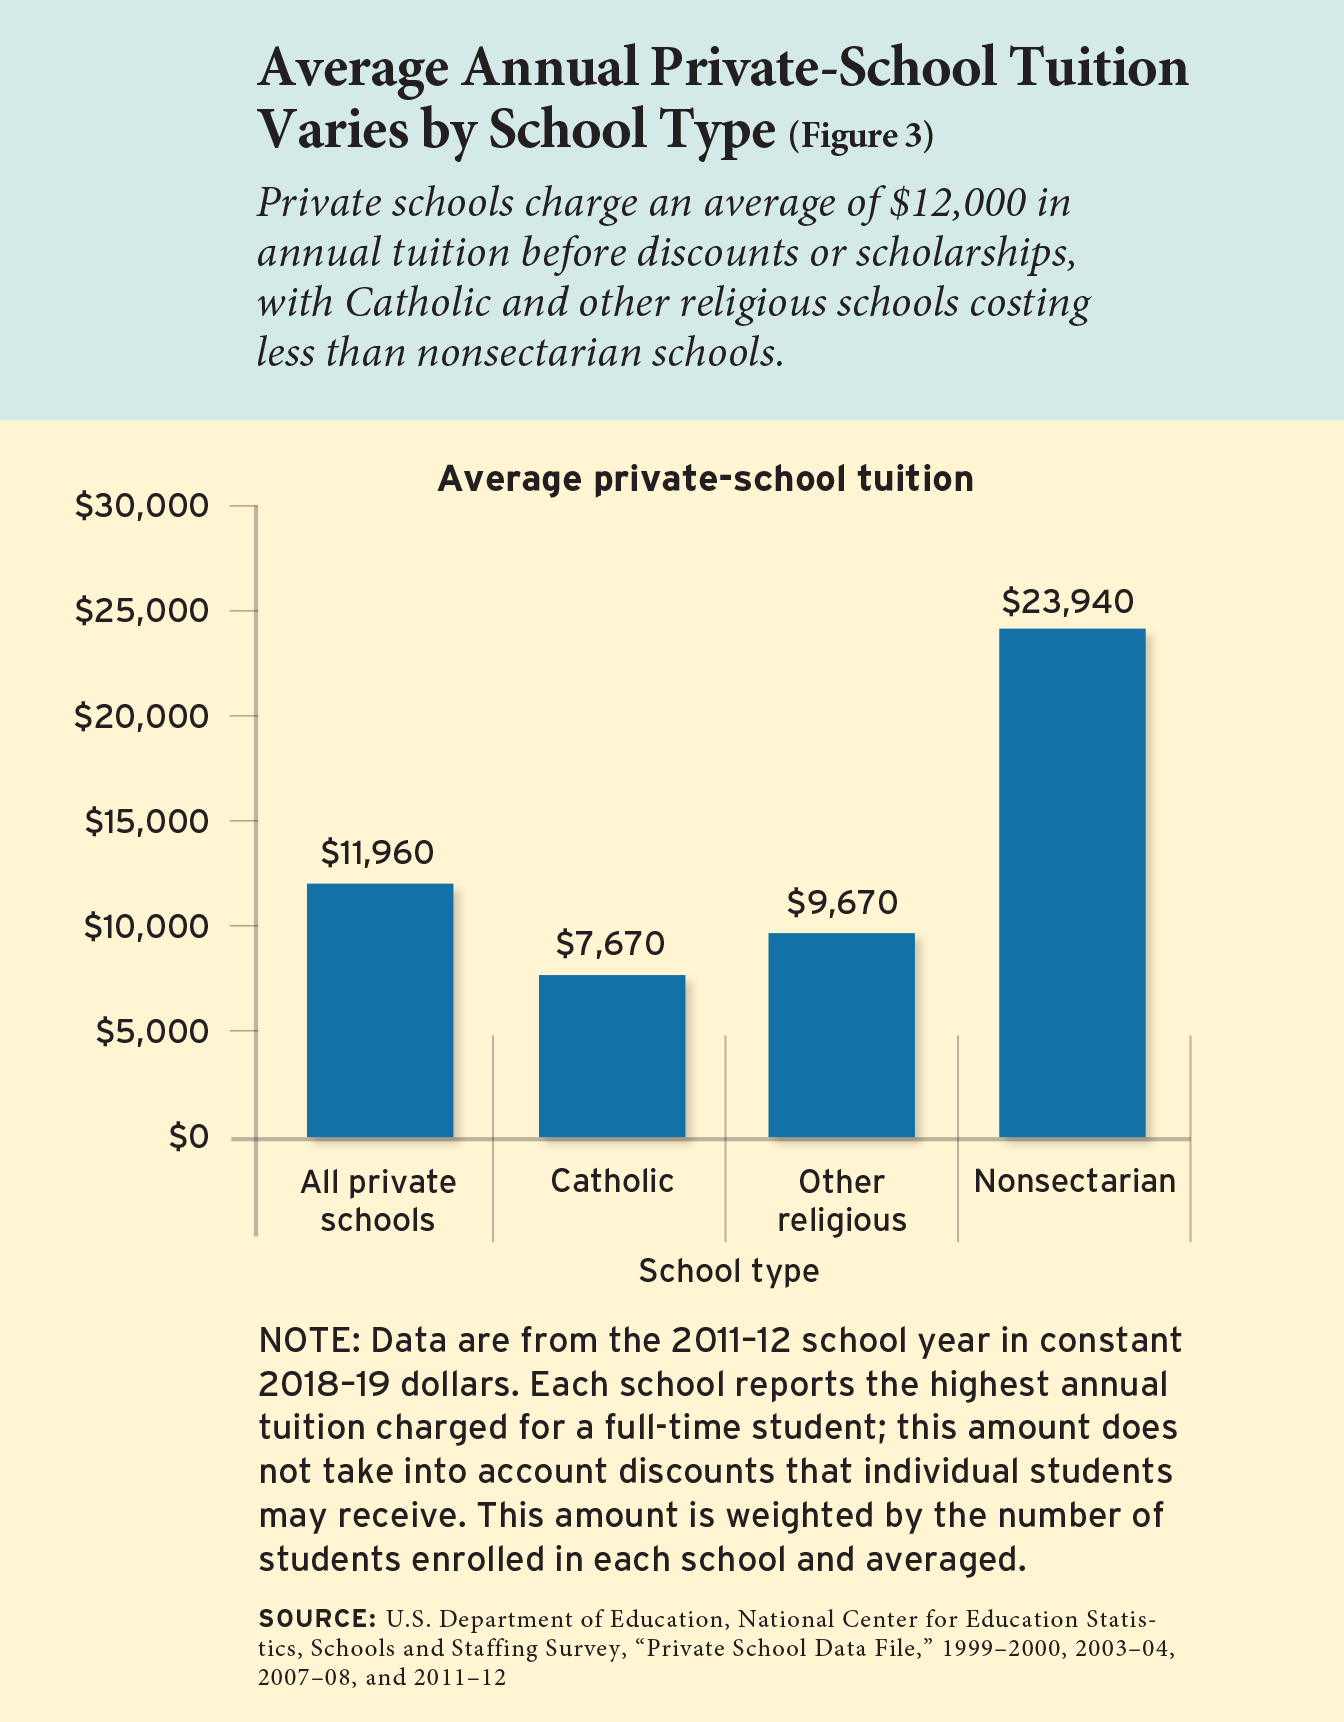 Figure 3: Average Annual Private-School Tuition Varies by School Type